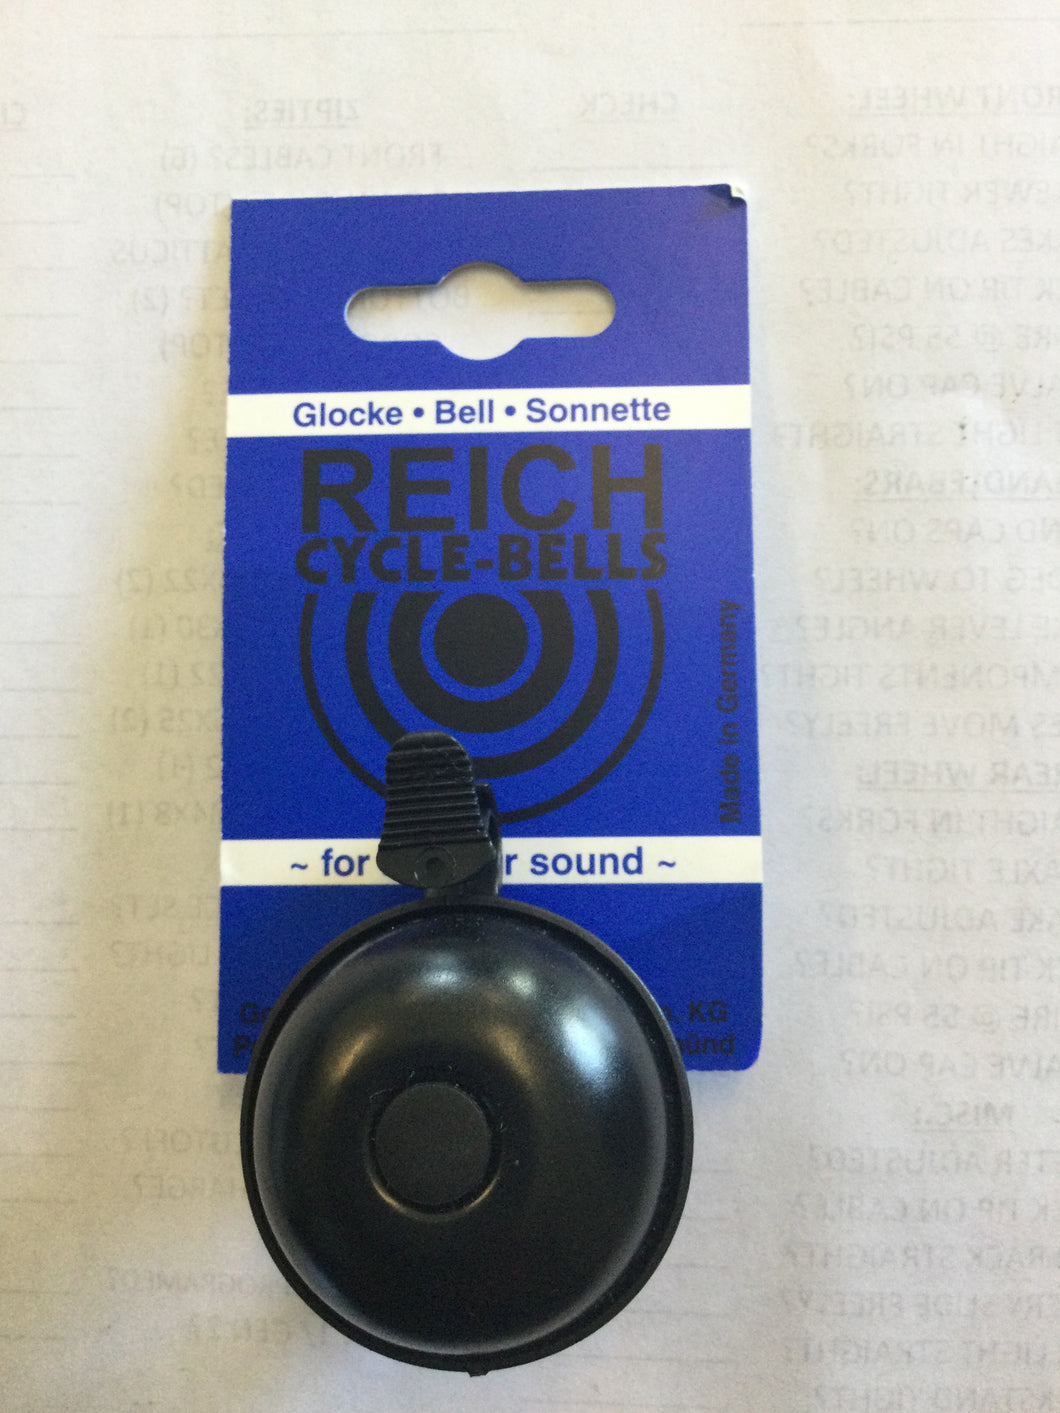 Reich cycle bell